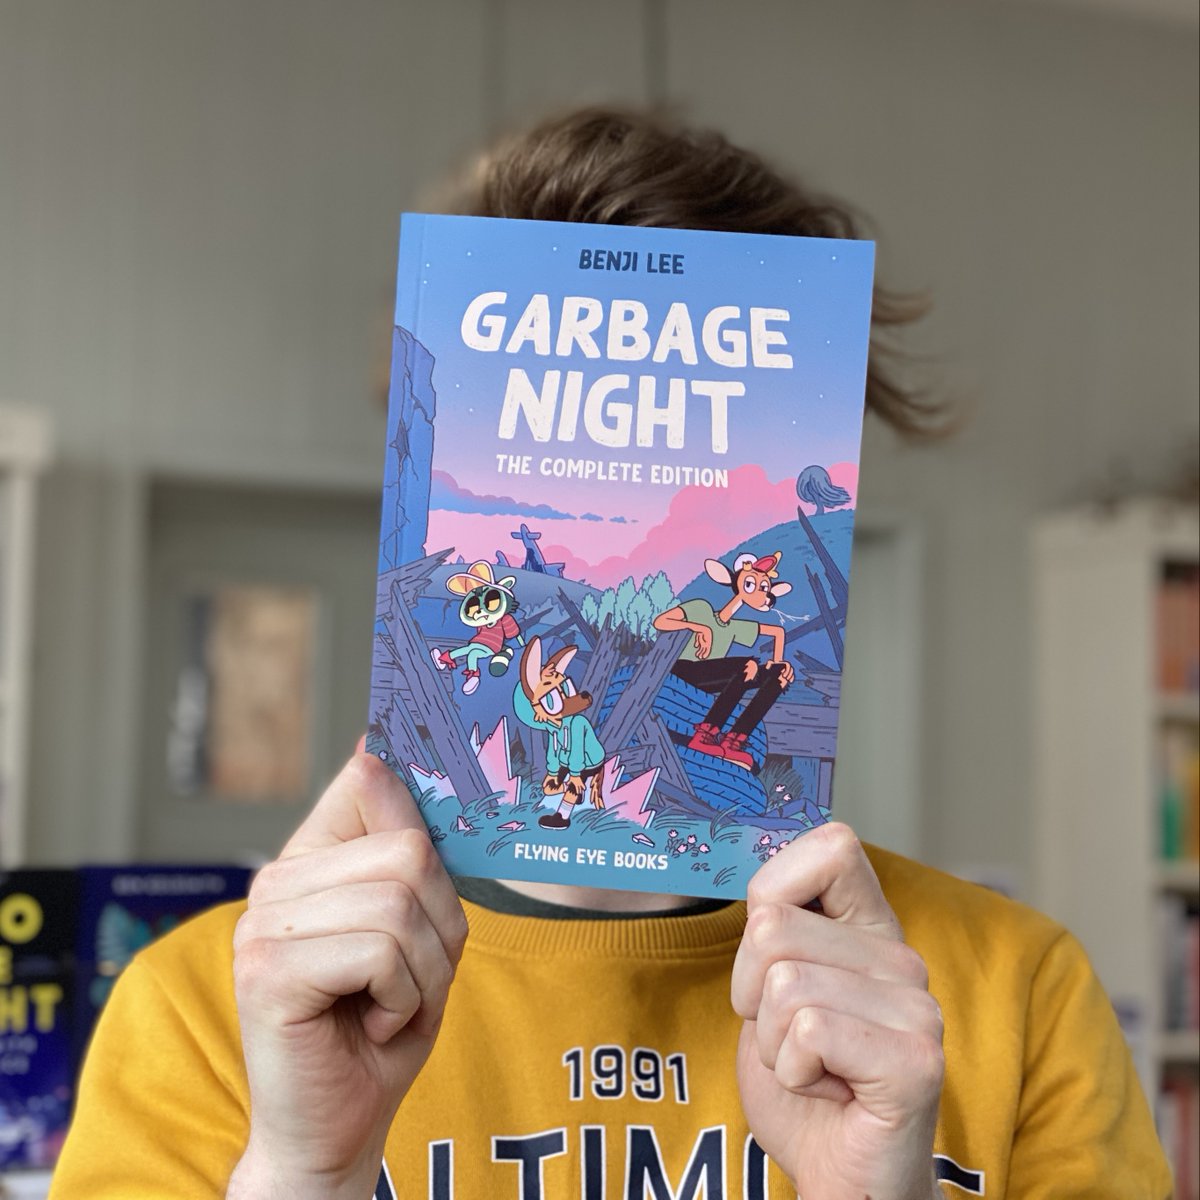 Just arrived is this new, complete edition of the graphic novel #GarbageNight by Benji Lee. Jack says: 'Republished in a complete edition with a brand-new sequel, this post-apocalyptic graphic novel from Benji Lee is worth reading for the colours alone.' @FlyingEyeBooks